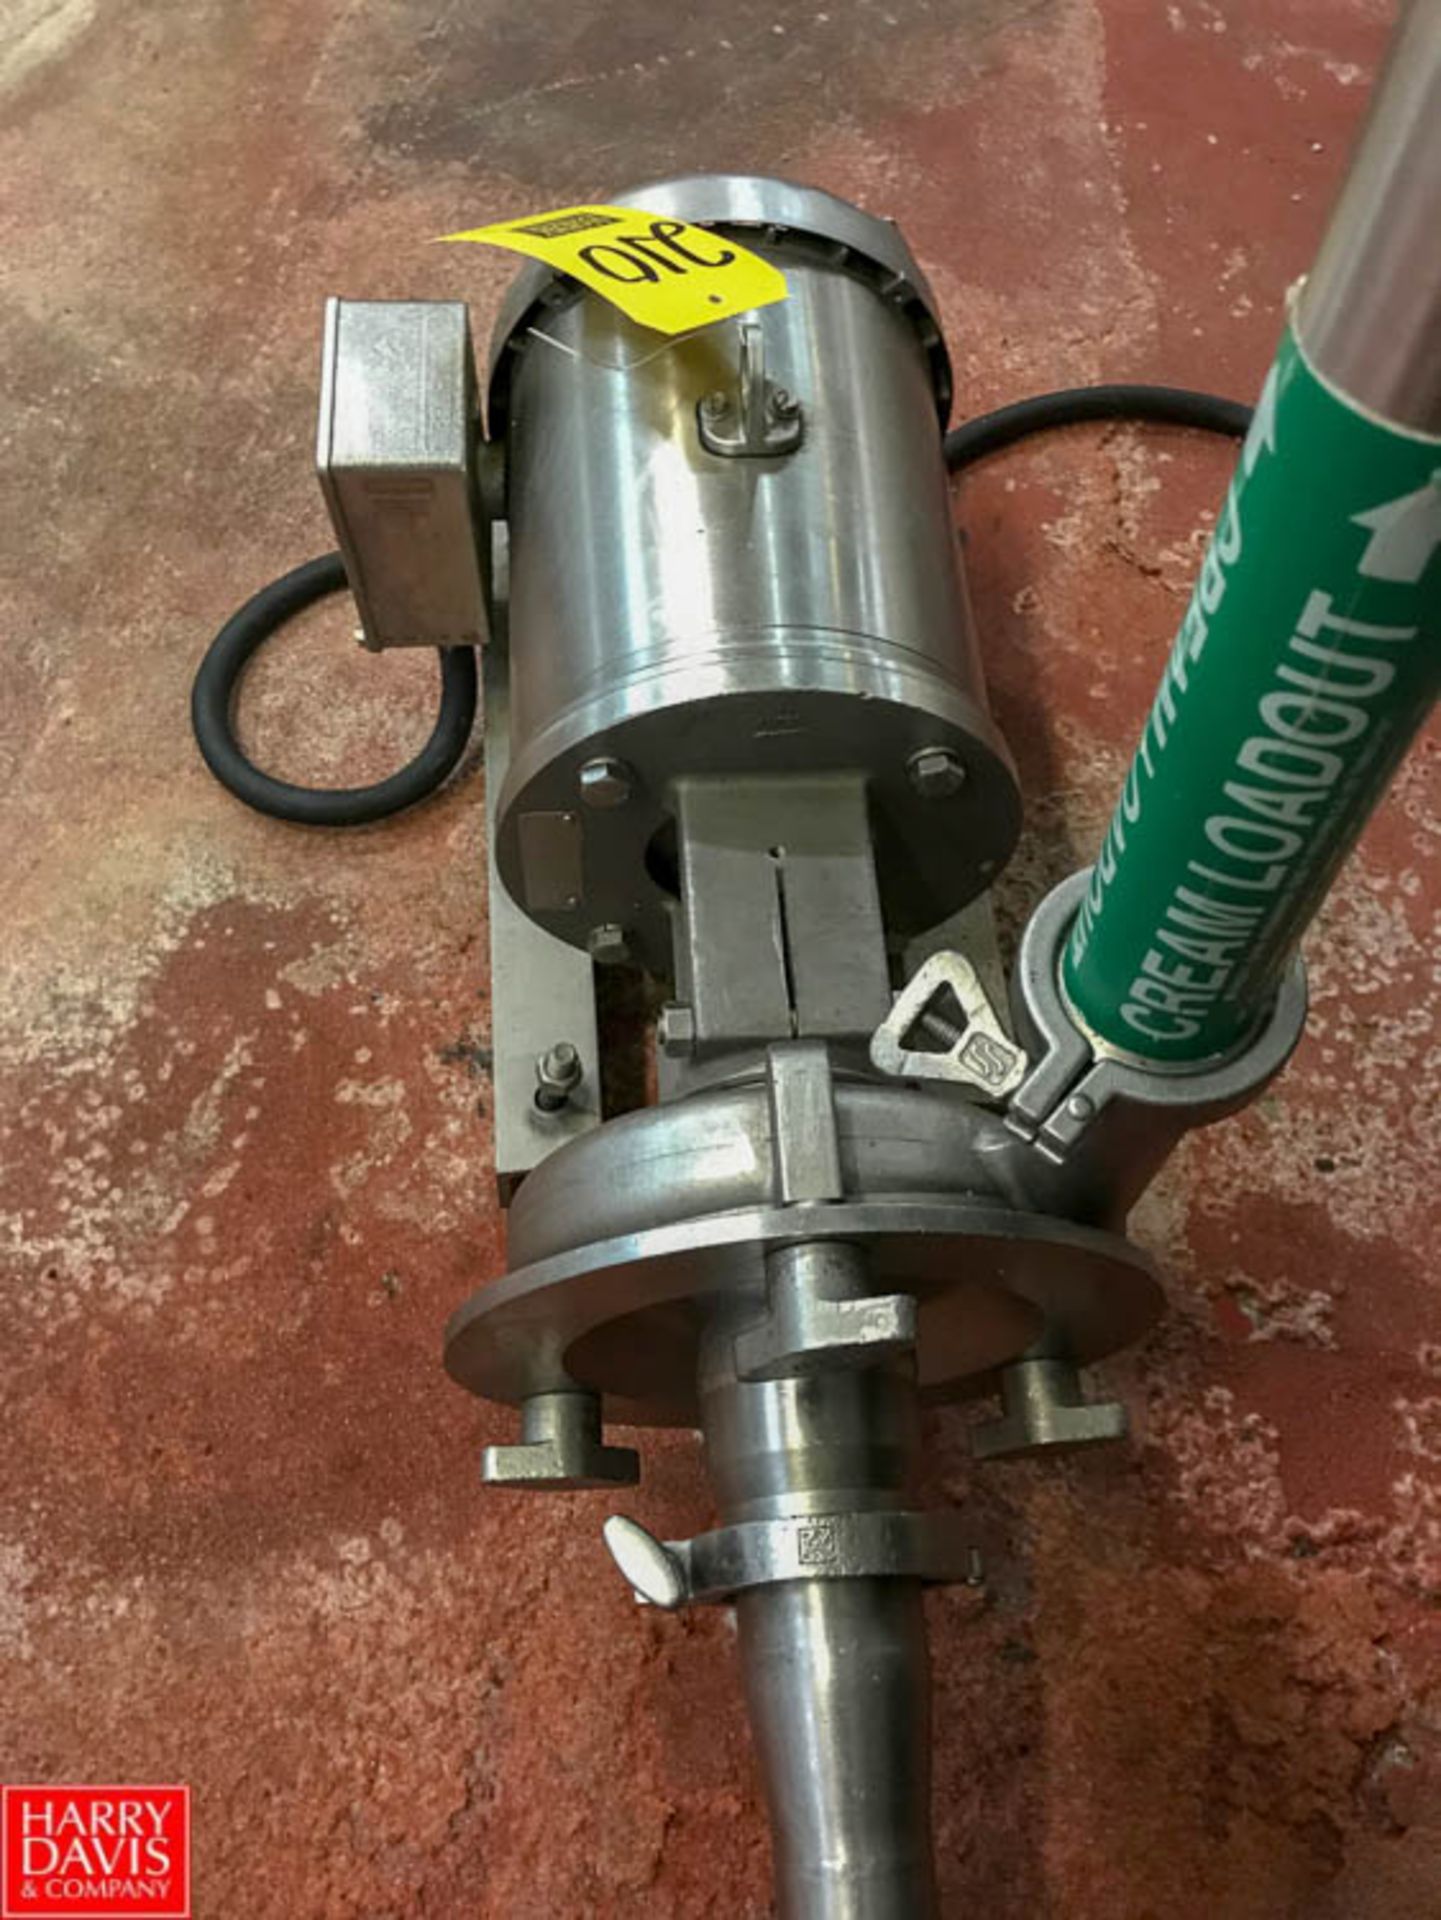 Ampco 5 HP Pump with S/S Clad Motor and 2" x 2.5" S/S Head, Clamp Type and Hubbell Disconnect